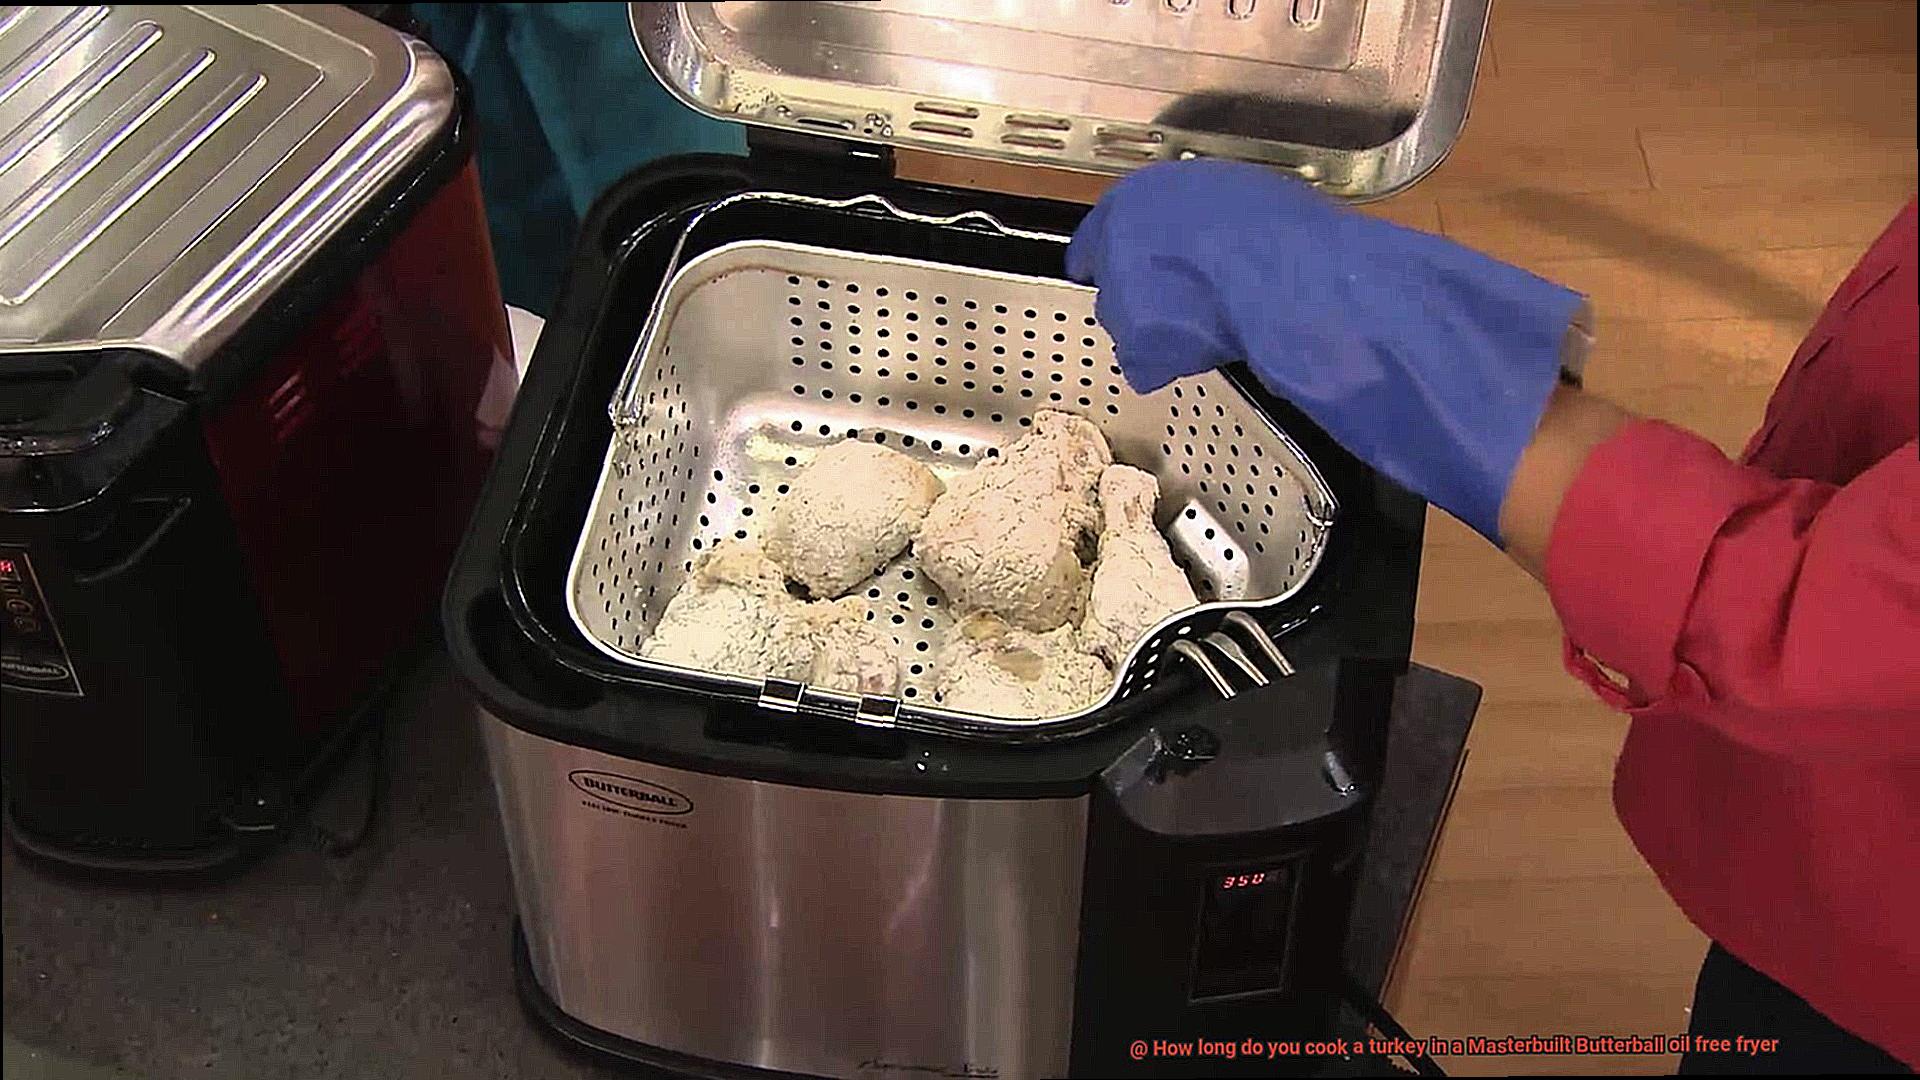 How long do you cook a turkey in a Masterbuilt Butterball oil free fryer-4